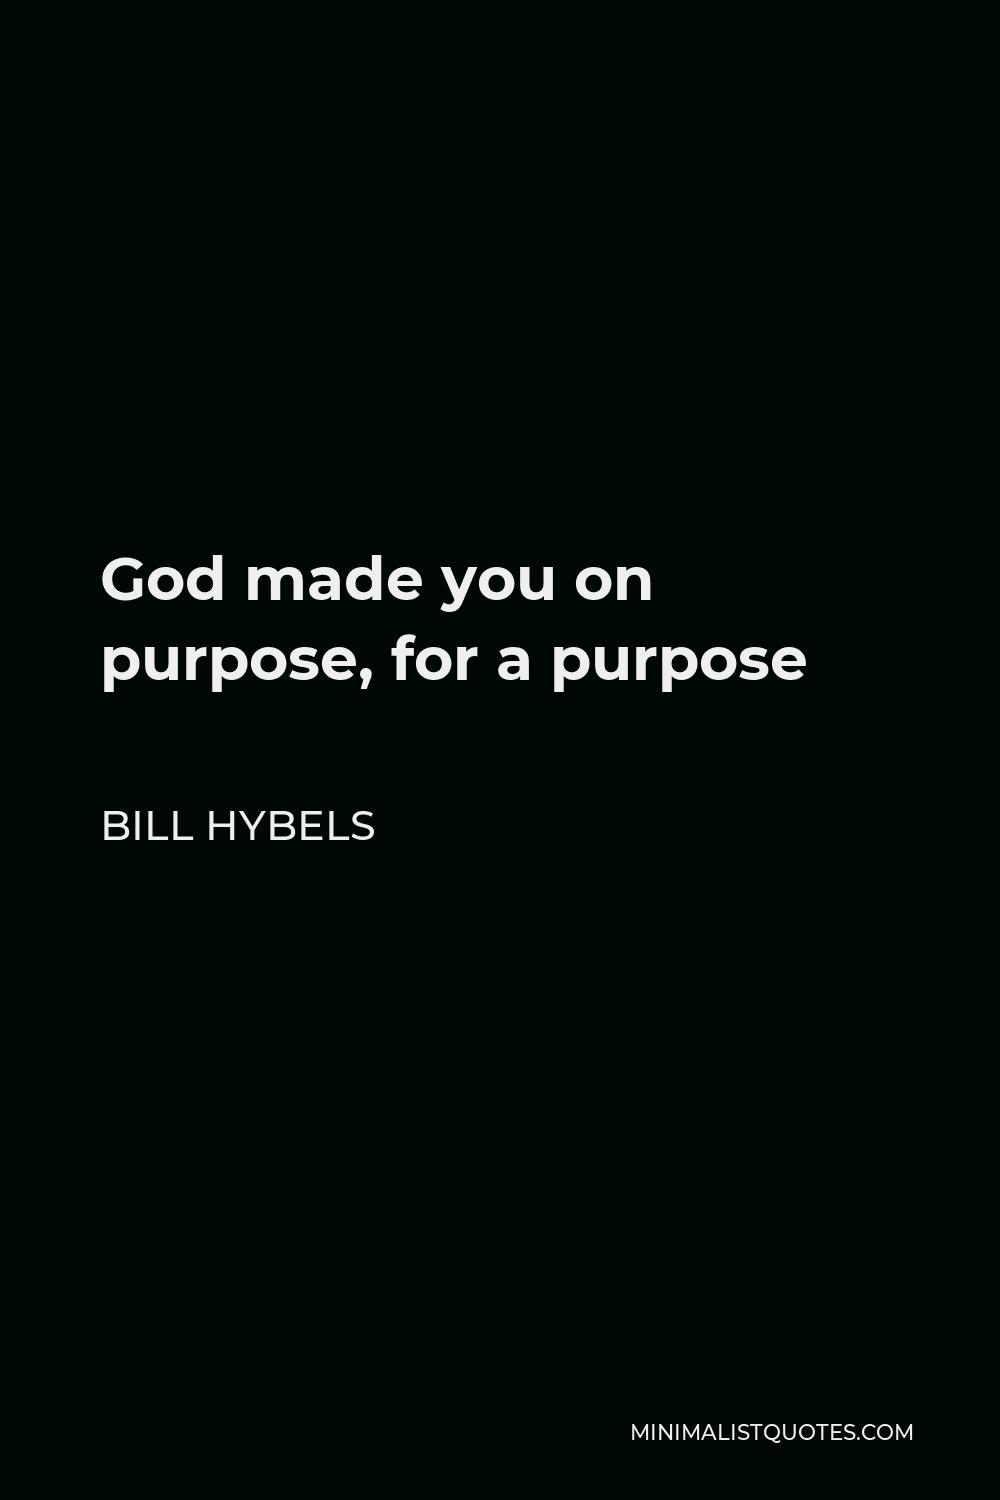 Bill Hybels Quote: God made you on purpose, for a purpose